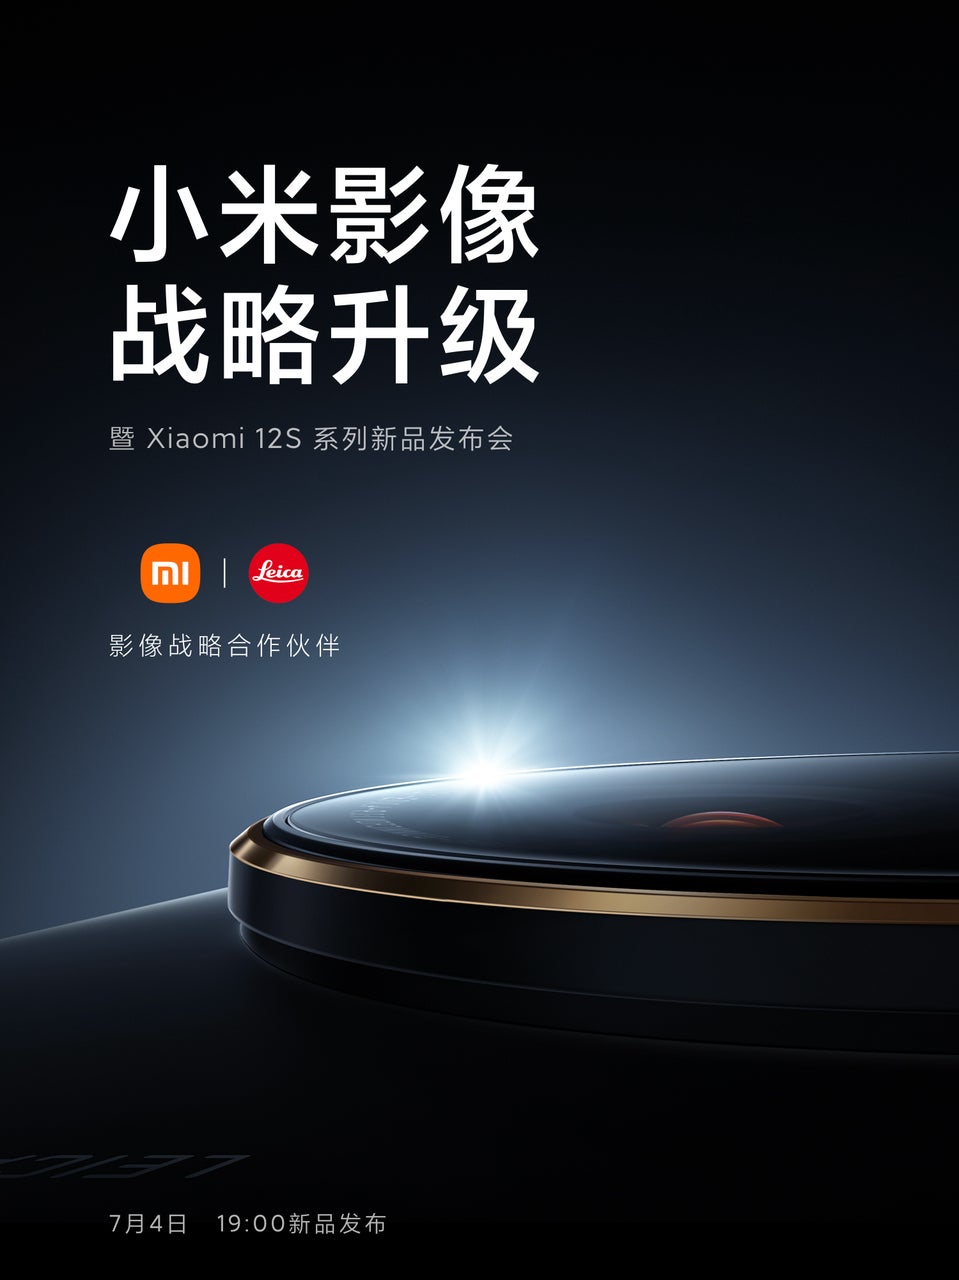 Xiaomi finally reveals the date and time of its new 12S series announcement